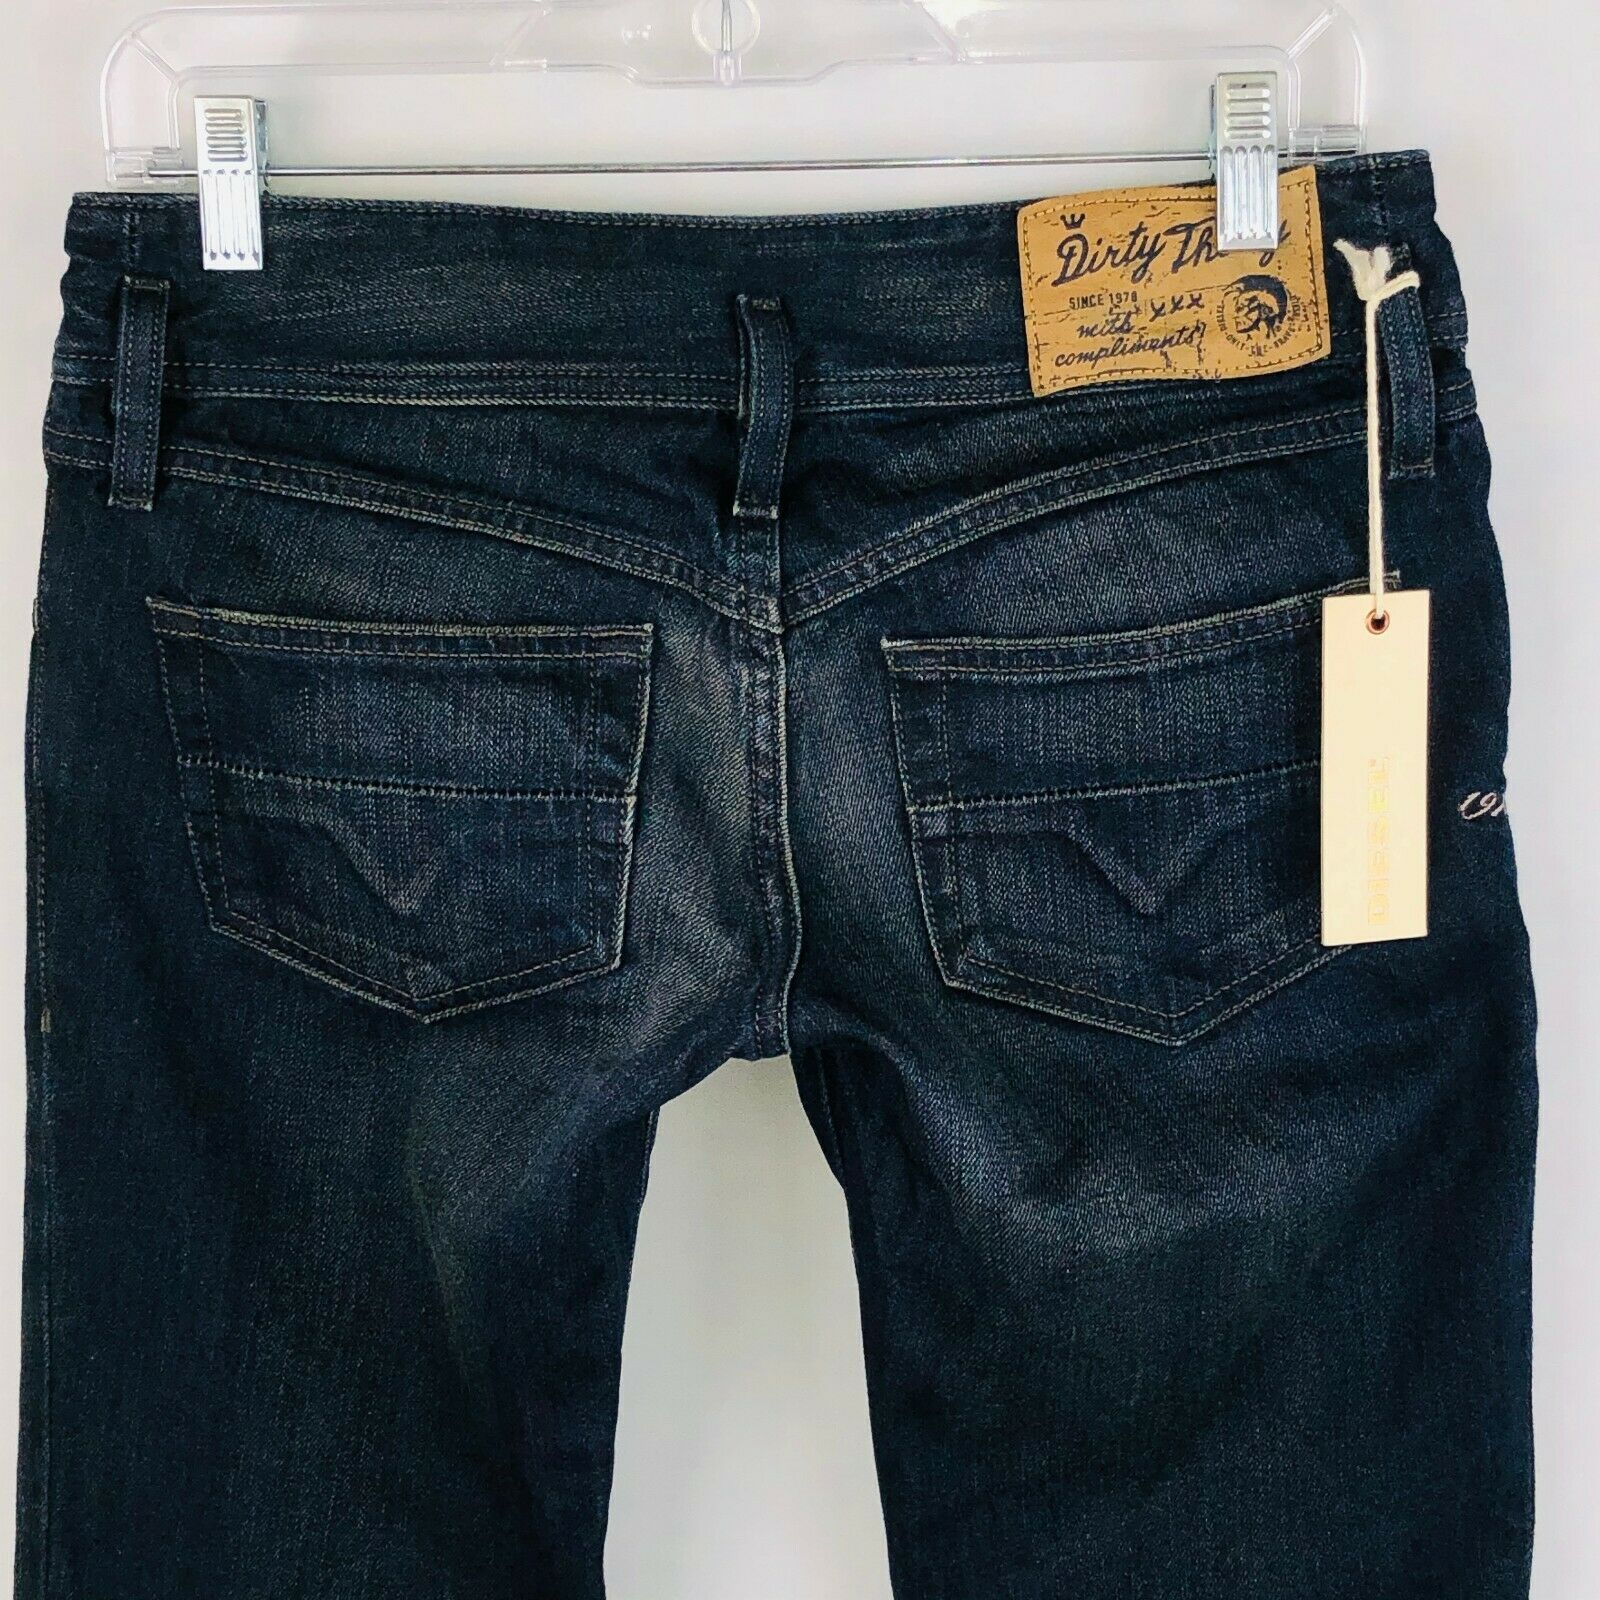 Rare Diesel Matic Jeans Dirty Thirty 008UJ 27 X 32 New - Jeans